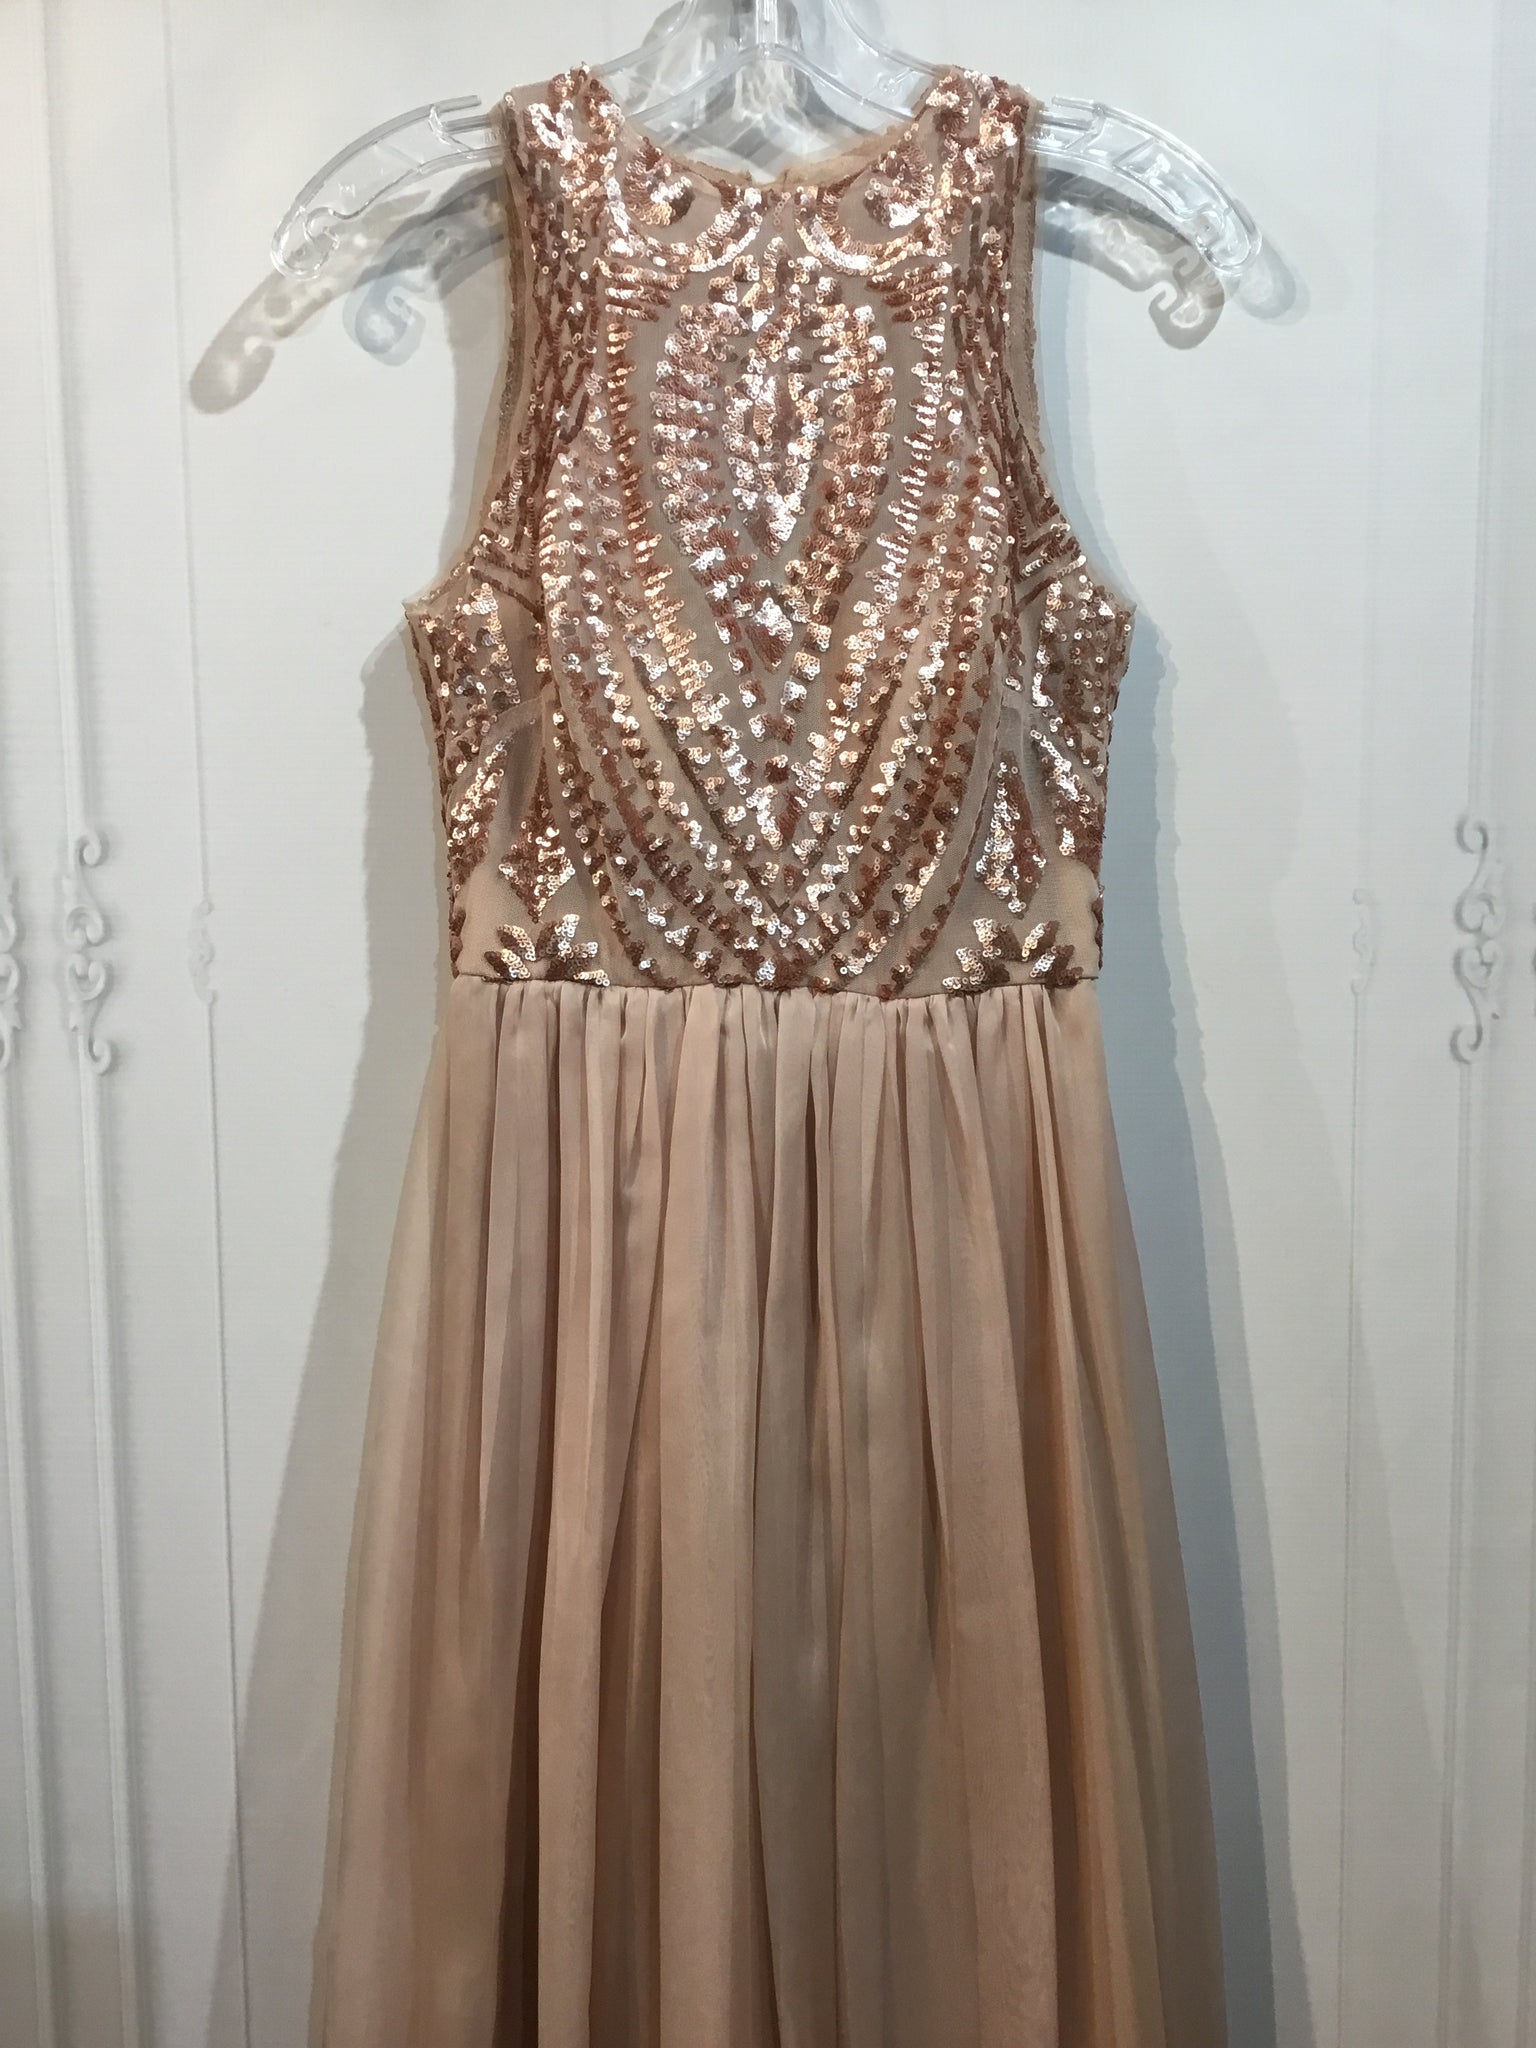 Bariano Size XS/0-2 Rose Gold Formal